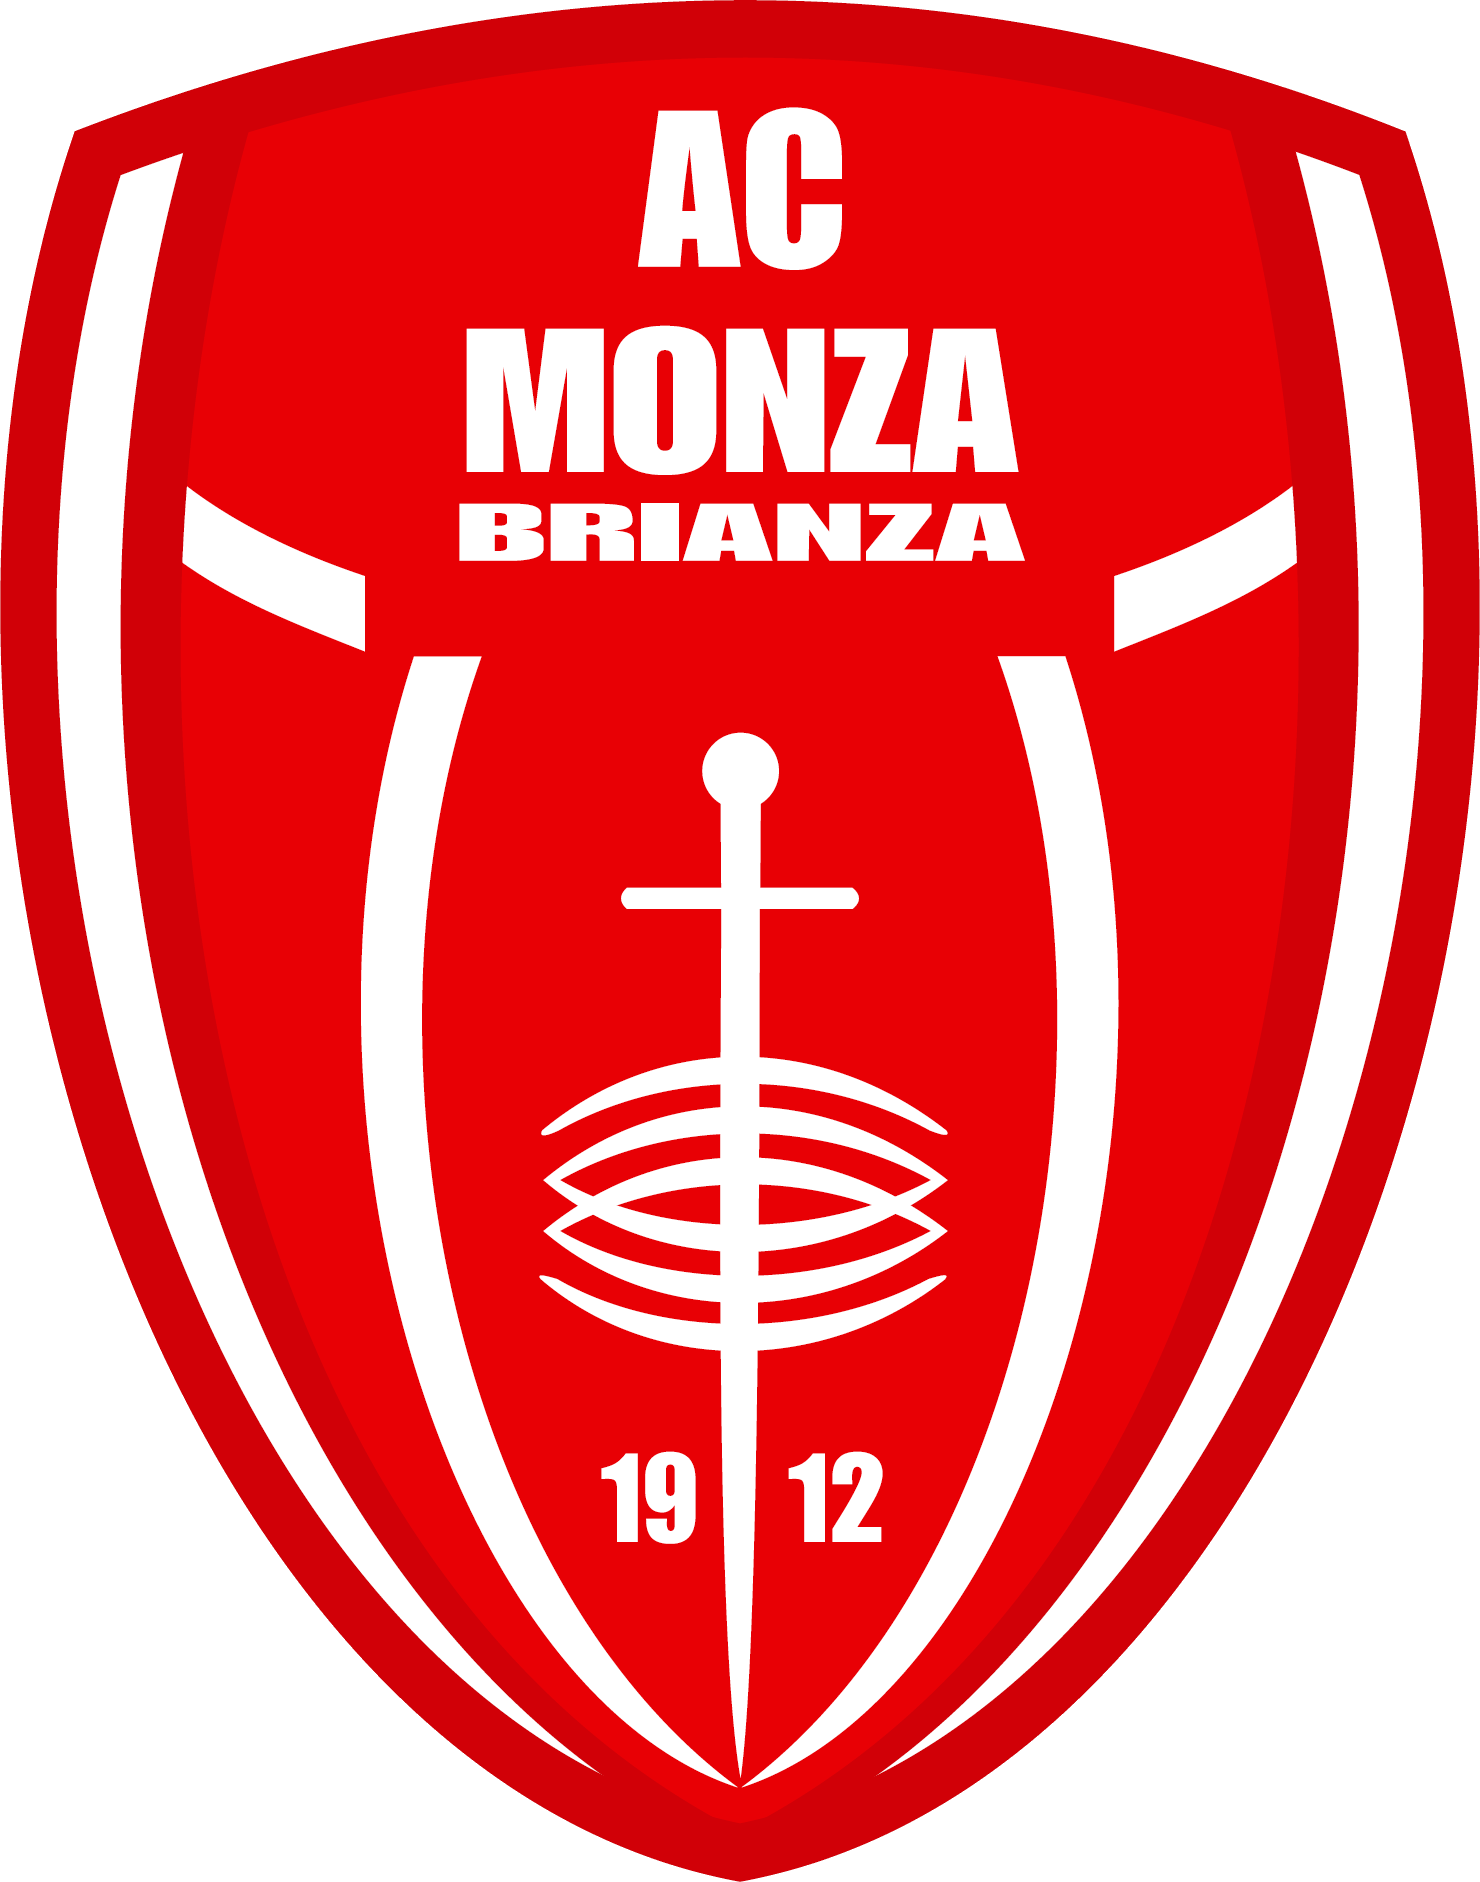 Lecce vs Monza Prediction: Monza is superior to Lecce in terms of the quality